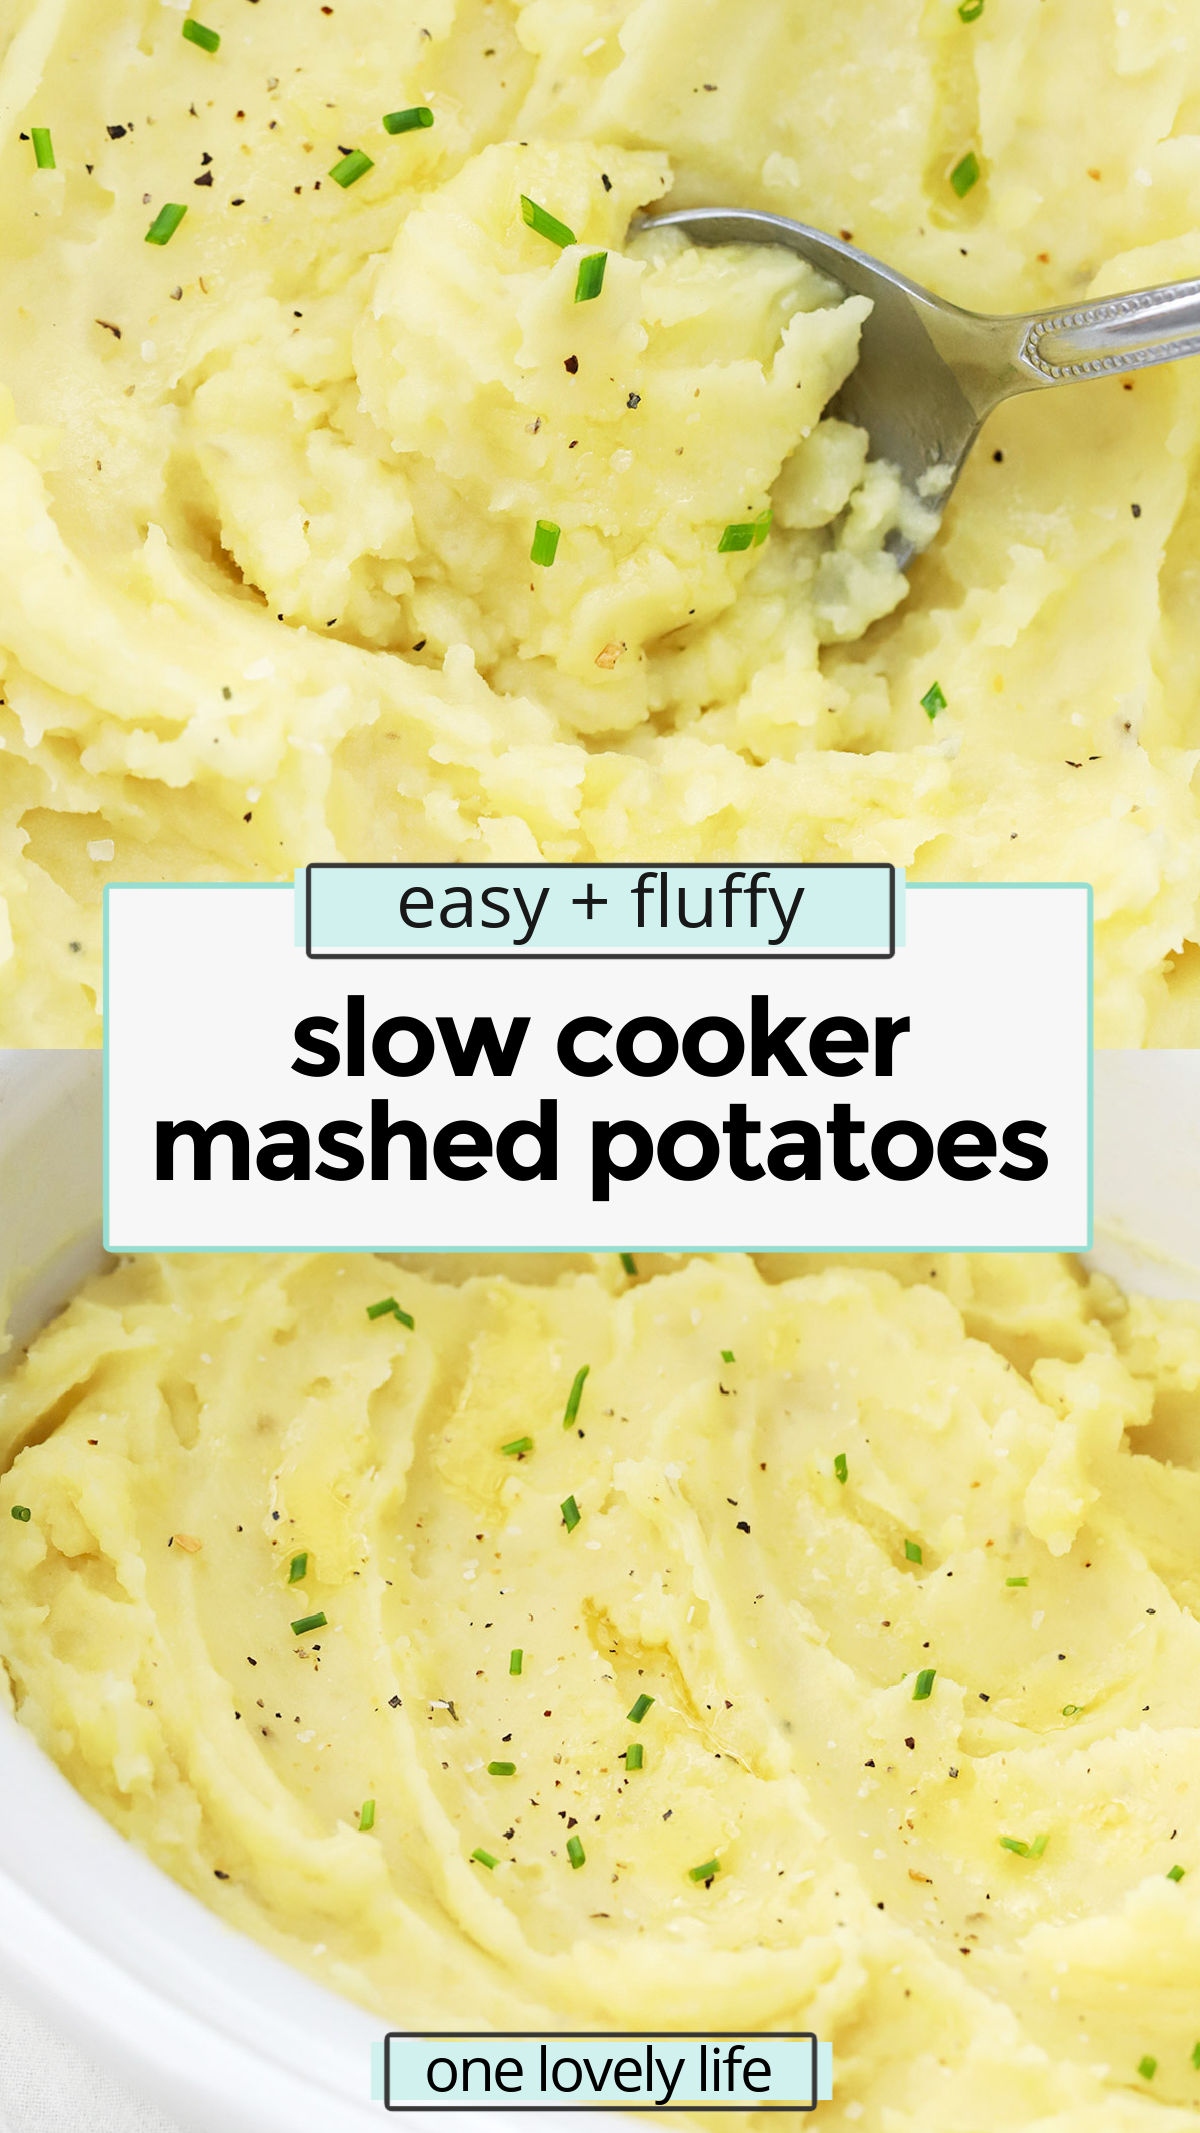 Slow Cooker Mashed Potatoes - This Crock pot mashed potatoes recipes is the EASIEST way to make this classic side dish! / crockpot mashed potatoes recipe / easy mashed potatoes / mashed potatoes in the slow cooker / mashed potatoes in the crock pot / Thanksgiving slow cooker recipes / Christmas slow cooker recipes / slow cooker side dish / gluten-free Thanksgiving